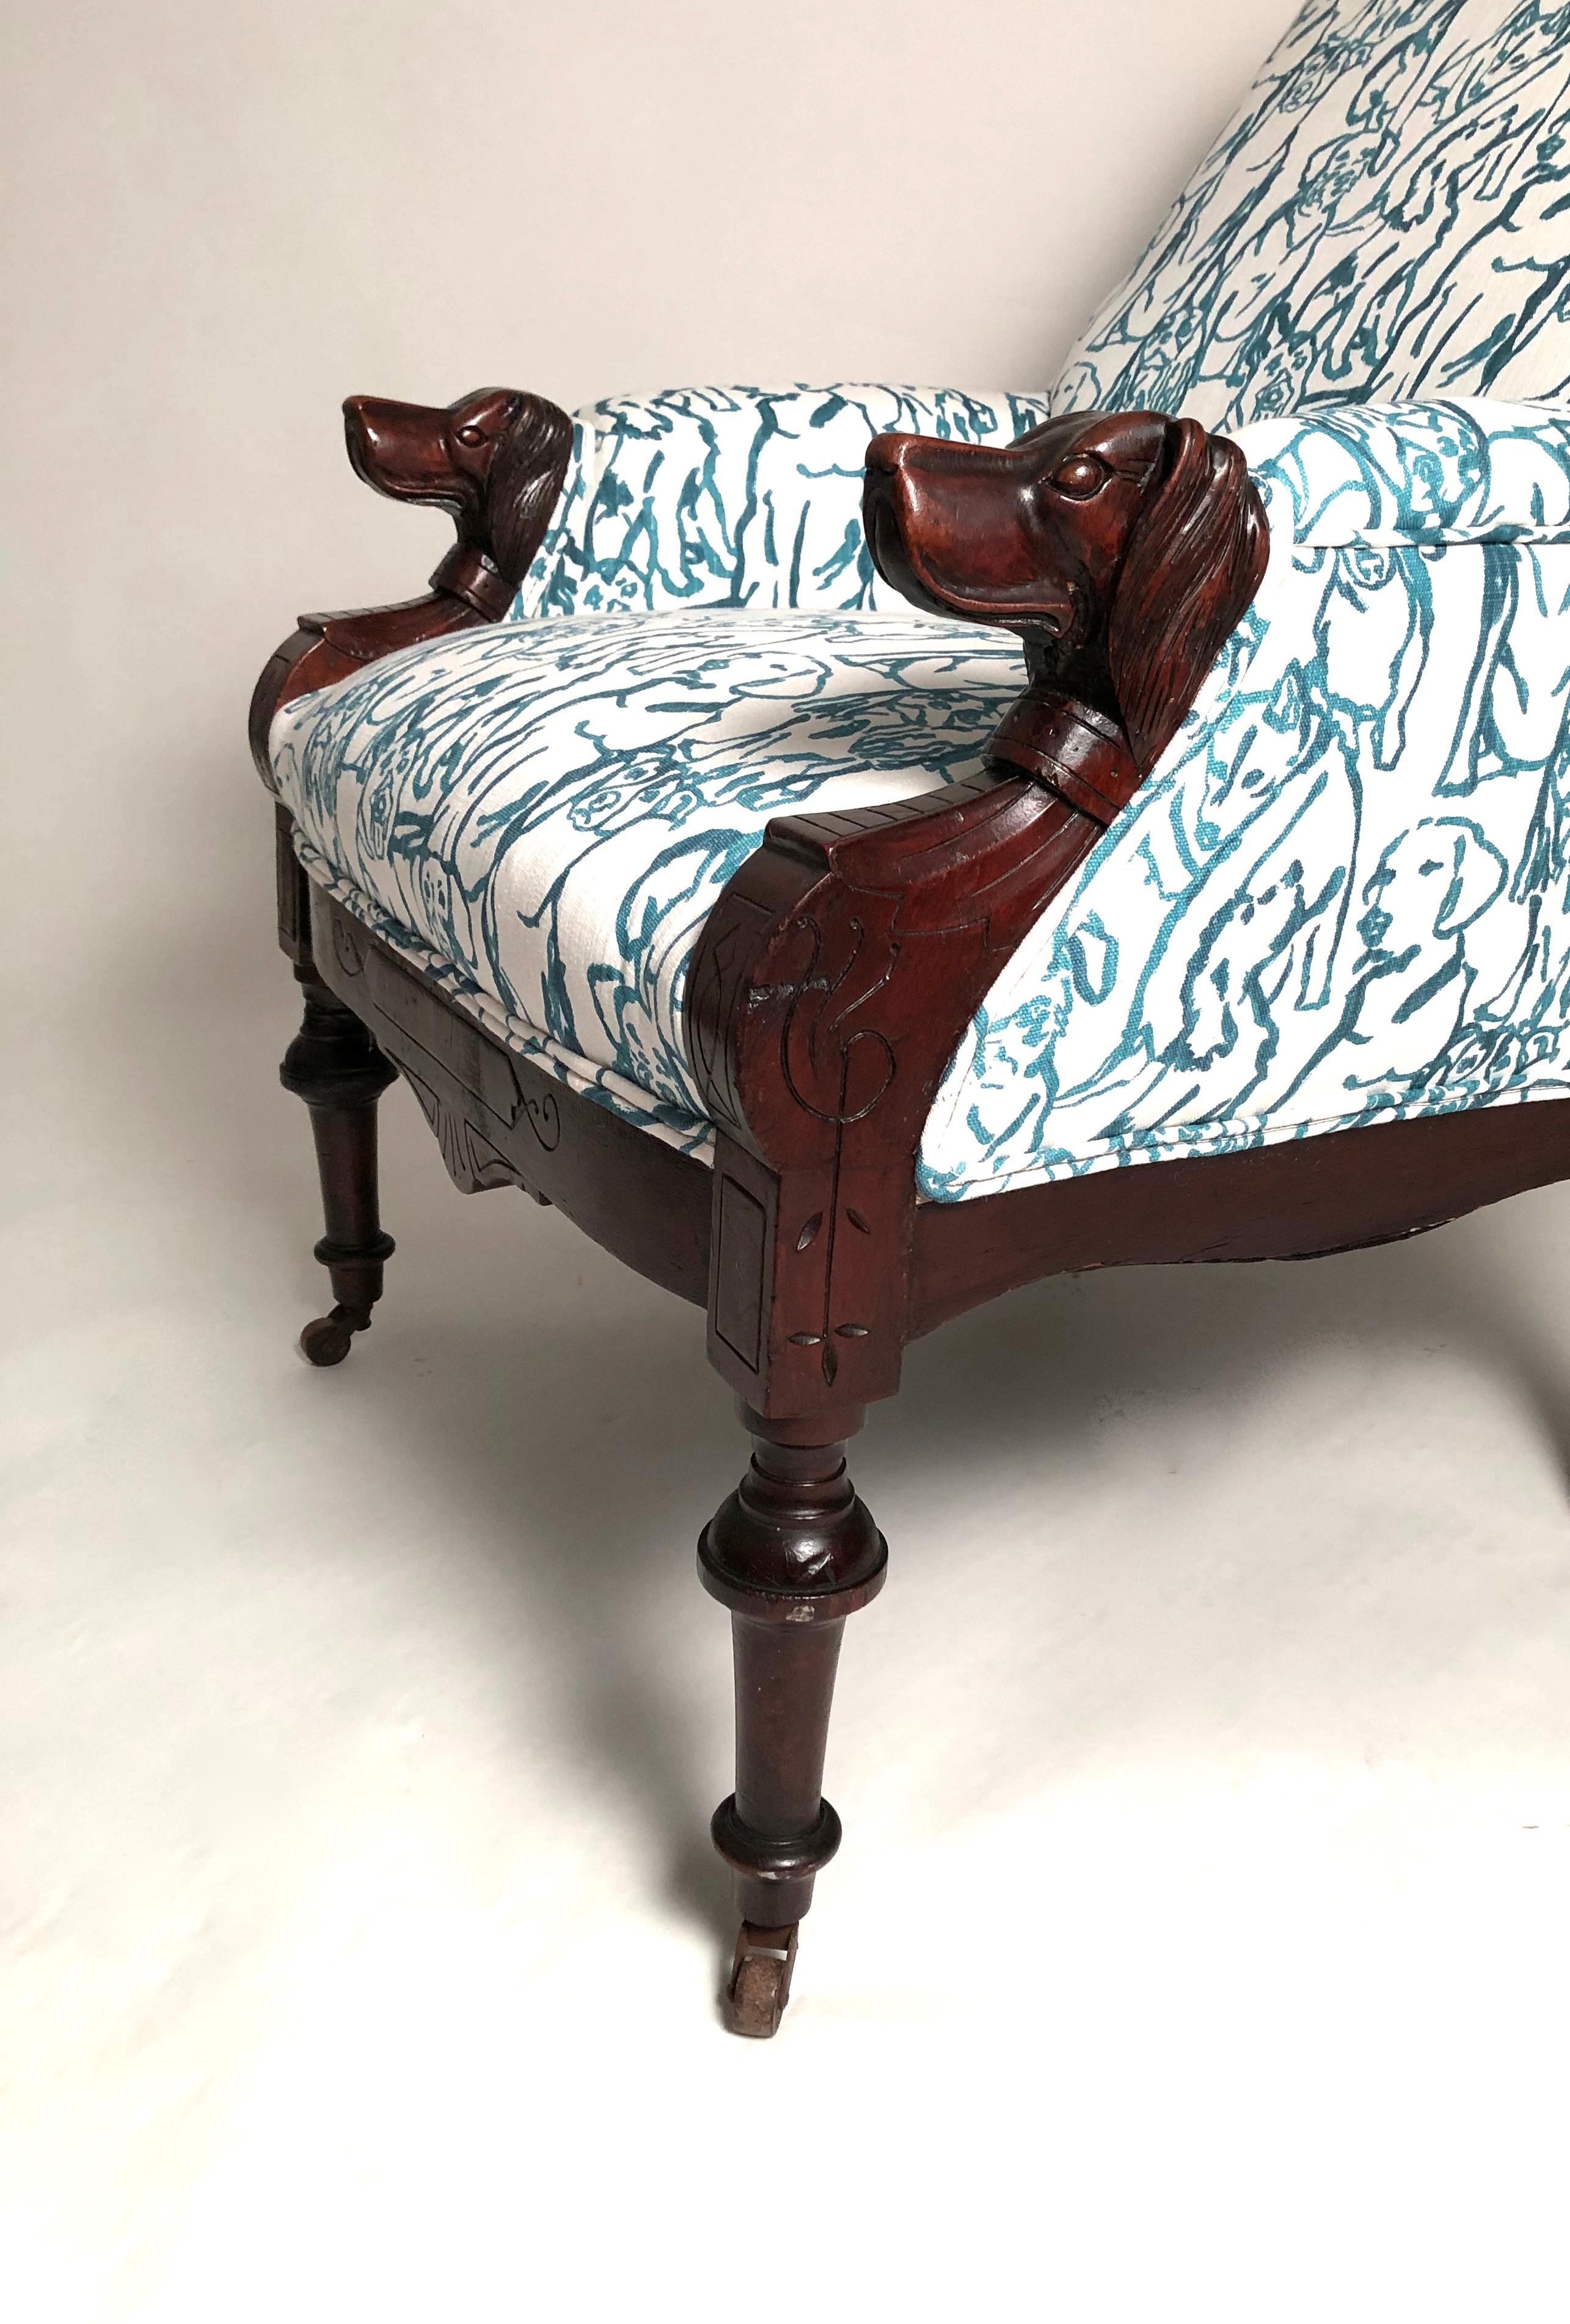 A very comfortable and well proportioned Victorian armchair, circa 1875-1880, with carved dog head armrests in mahogany, newly upholstered in a blue and white printed cotton fabric with charming dog illustrations on it. The ends of the armrests are